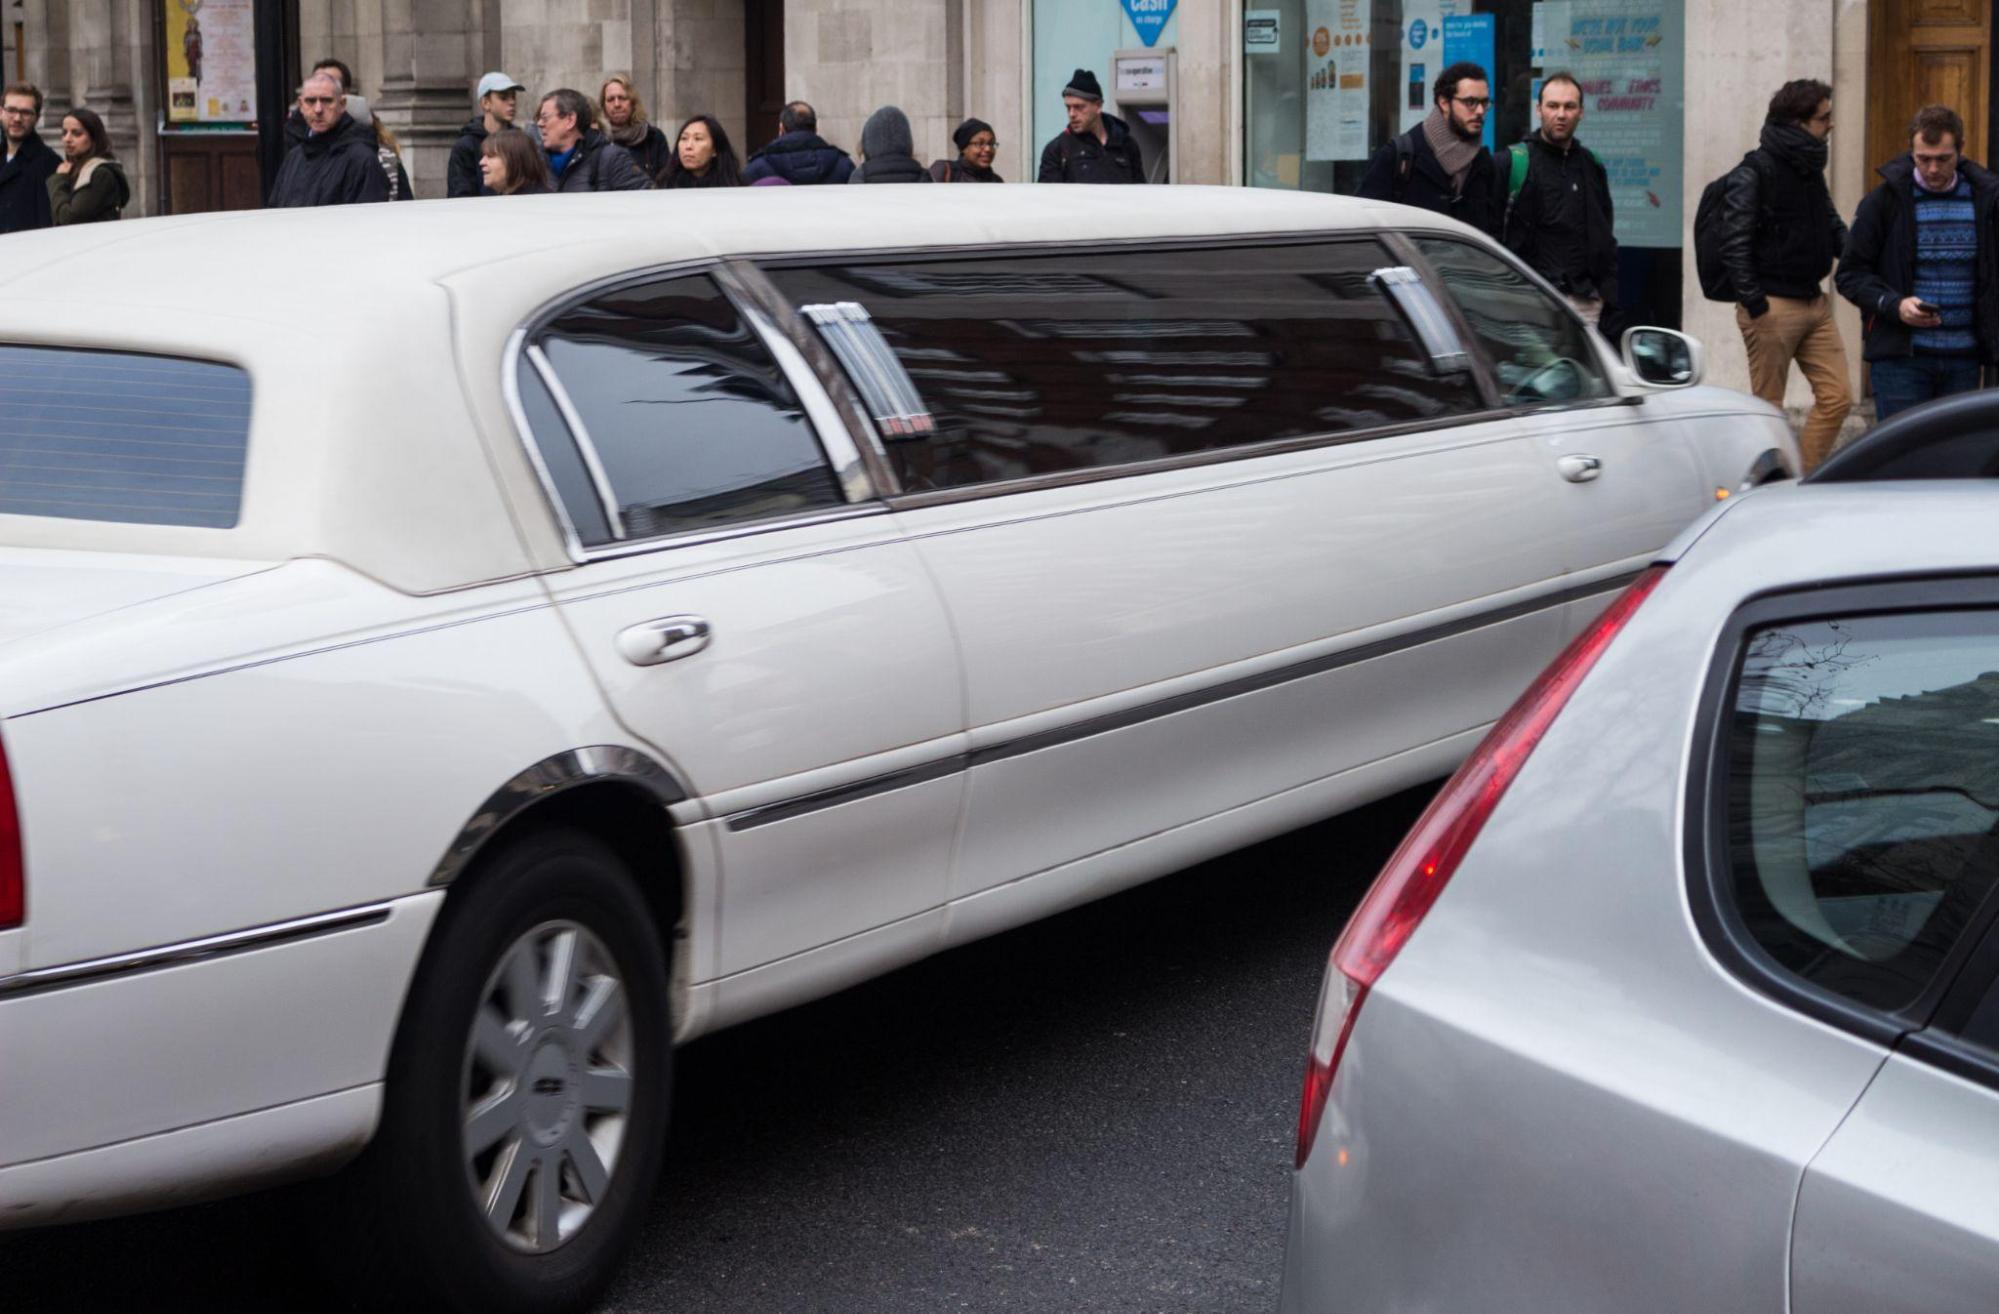 A white limousine parked outside a building